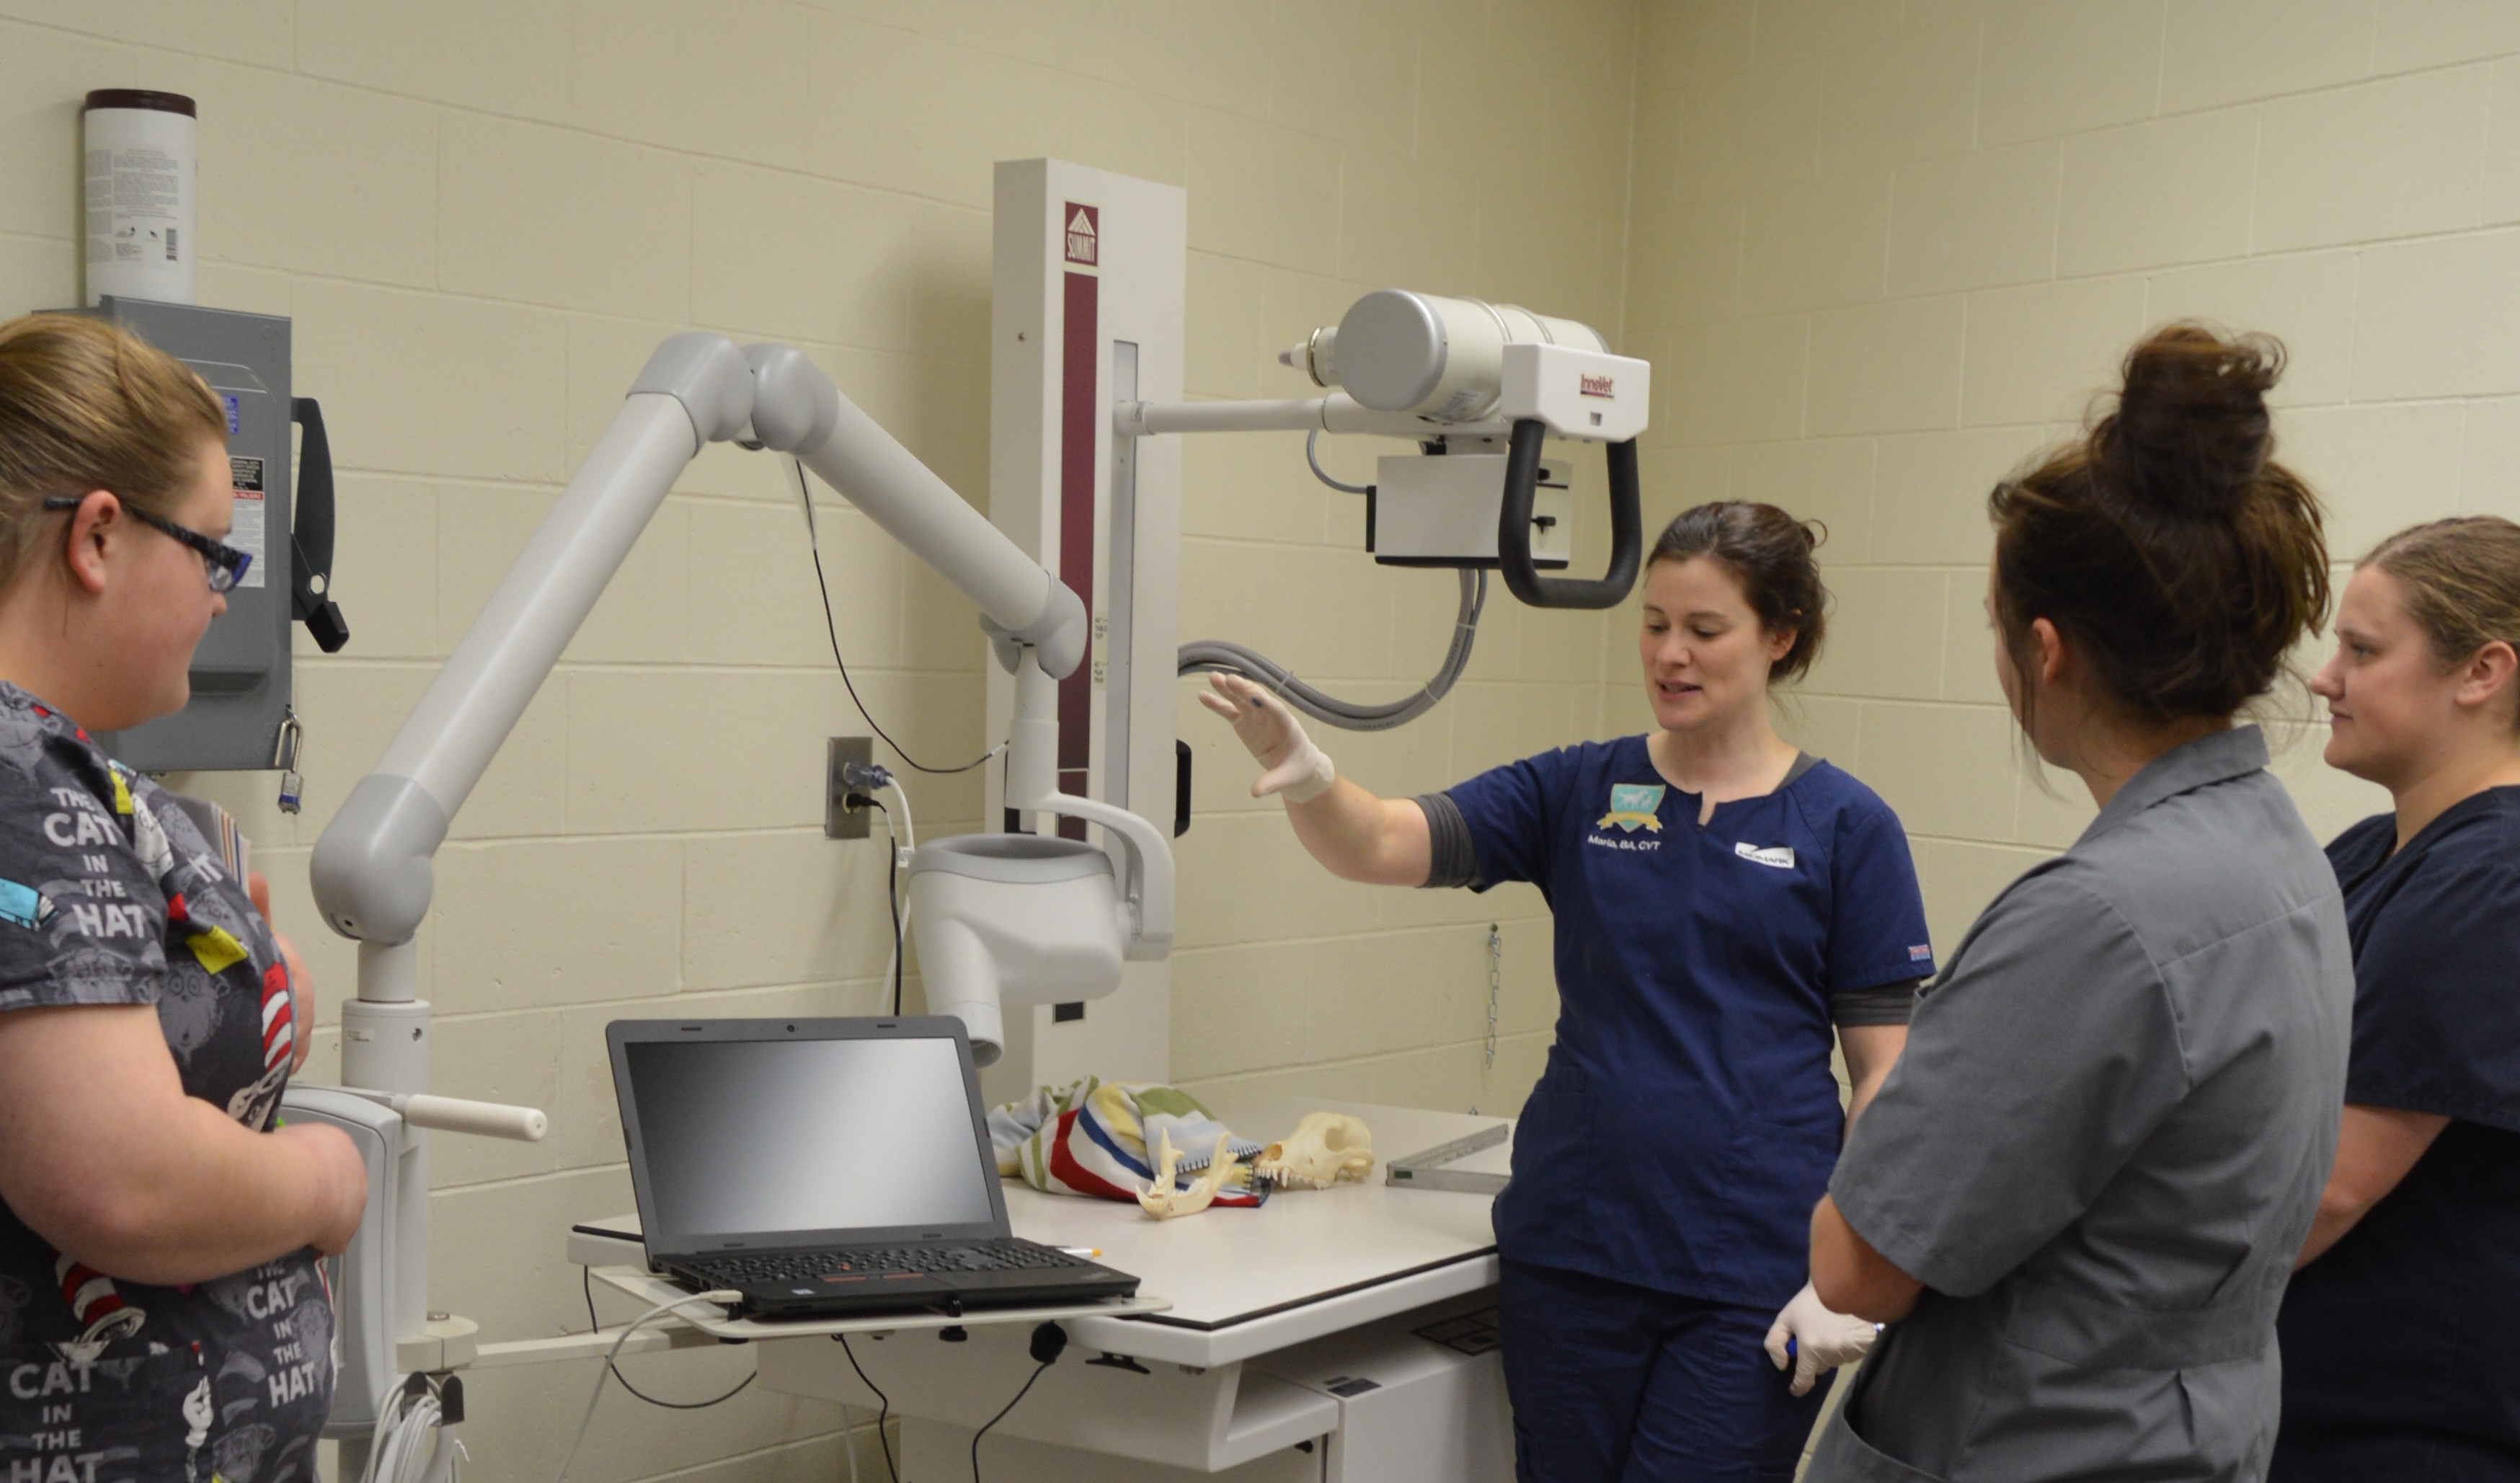 NCTA Vet Tech students receive training from Maria Nellessen, CVT, with Midmark Animal Health, on how to operate dental radiology equipment for small animals. From left, are students Emily Lamgo of Denver, Hanna Christenson of Ord, and Rebecca Wentz of Clayton, Kansas. (Hauptman/NCTA Photo) 